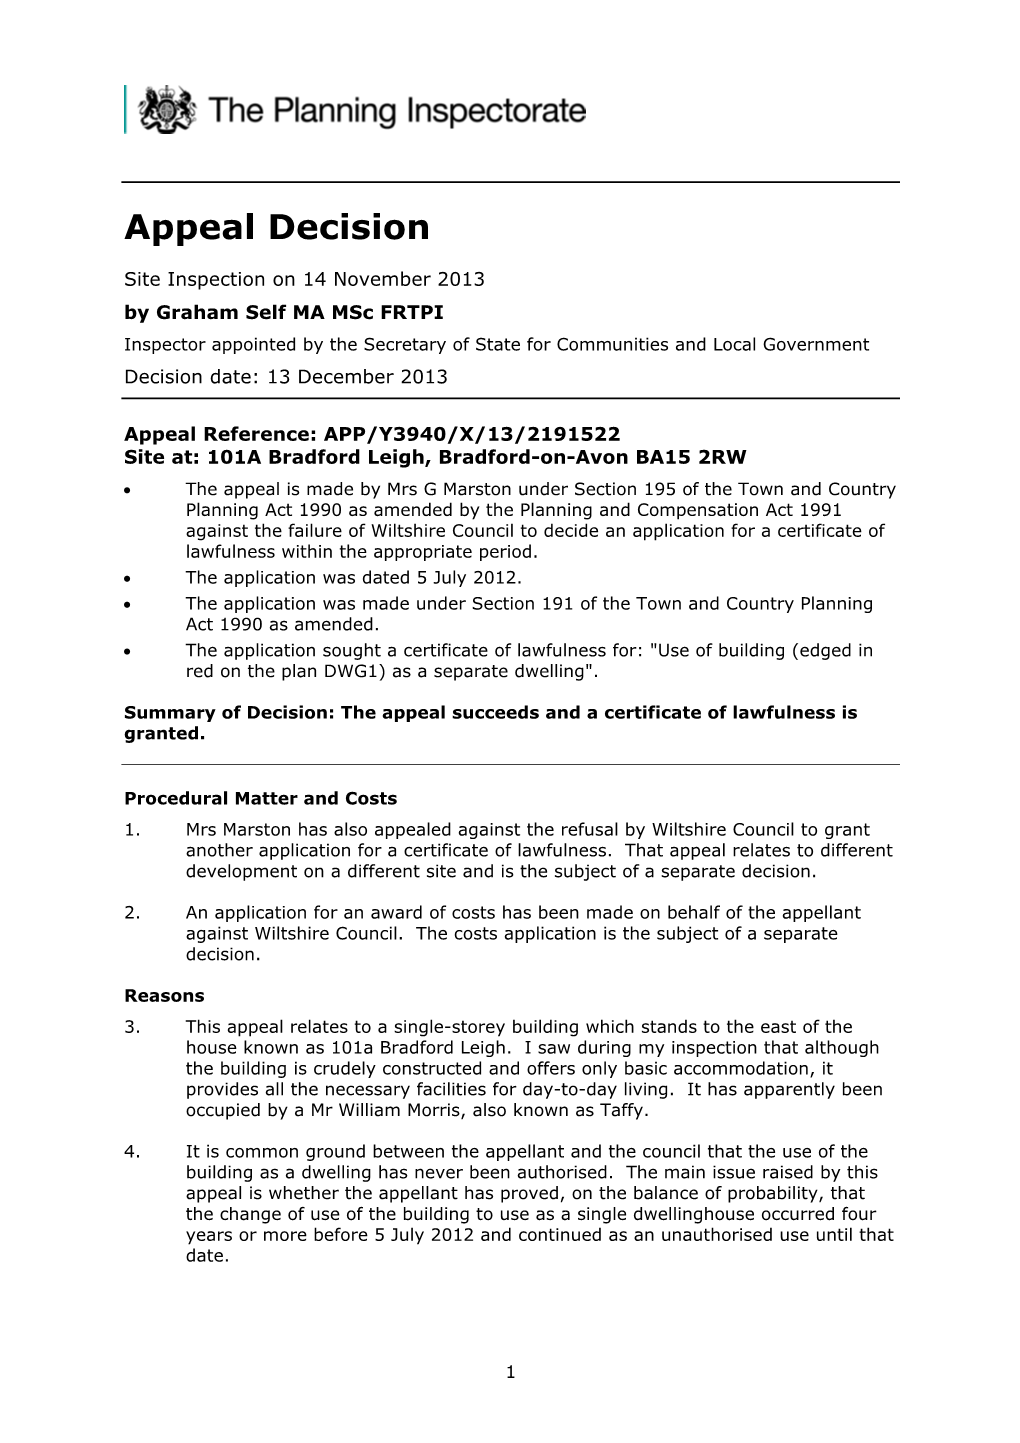 Appeal Decision